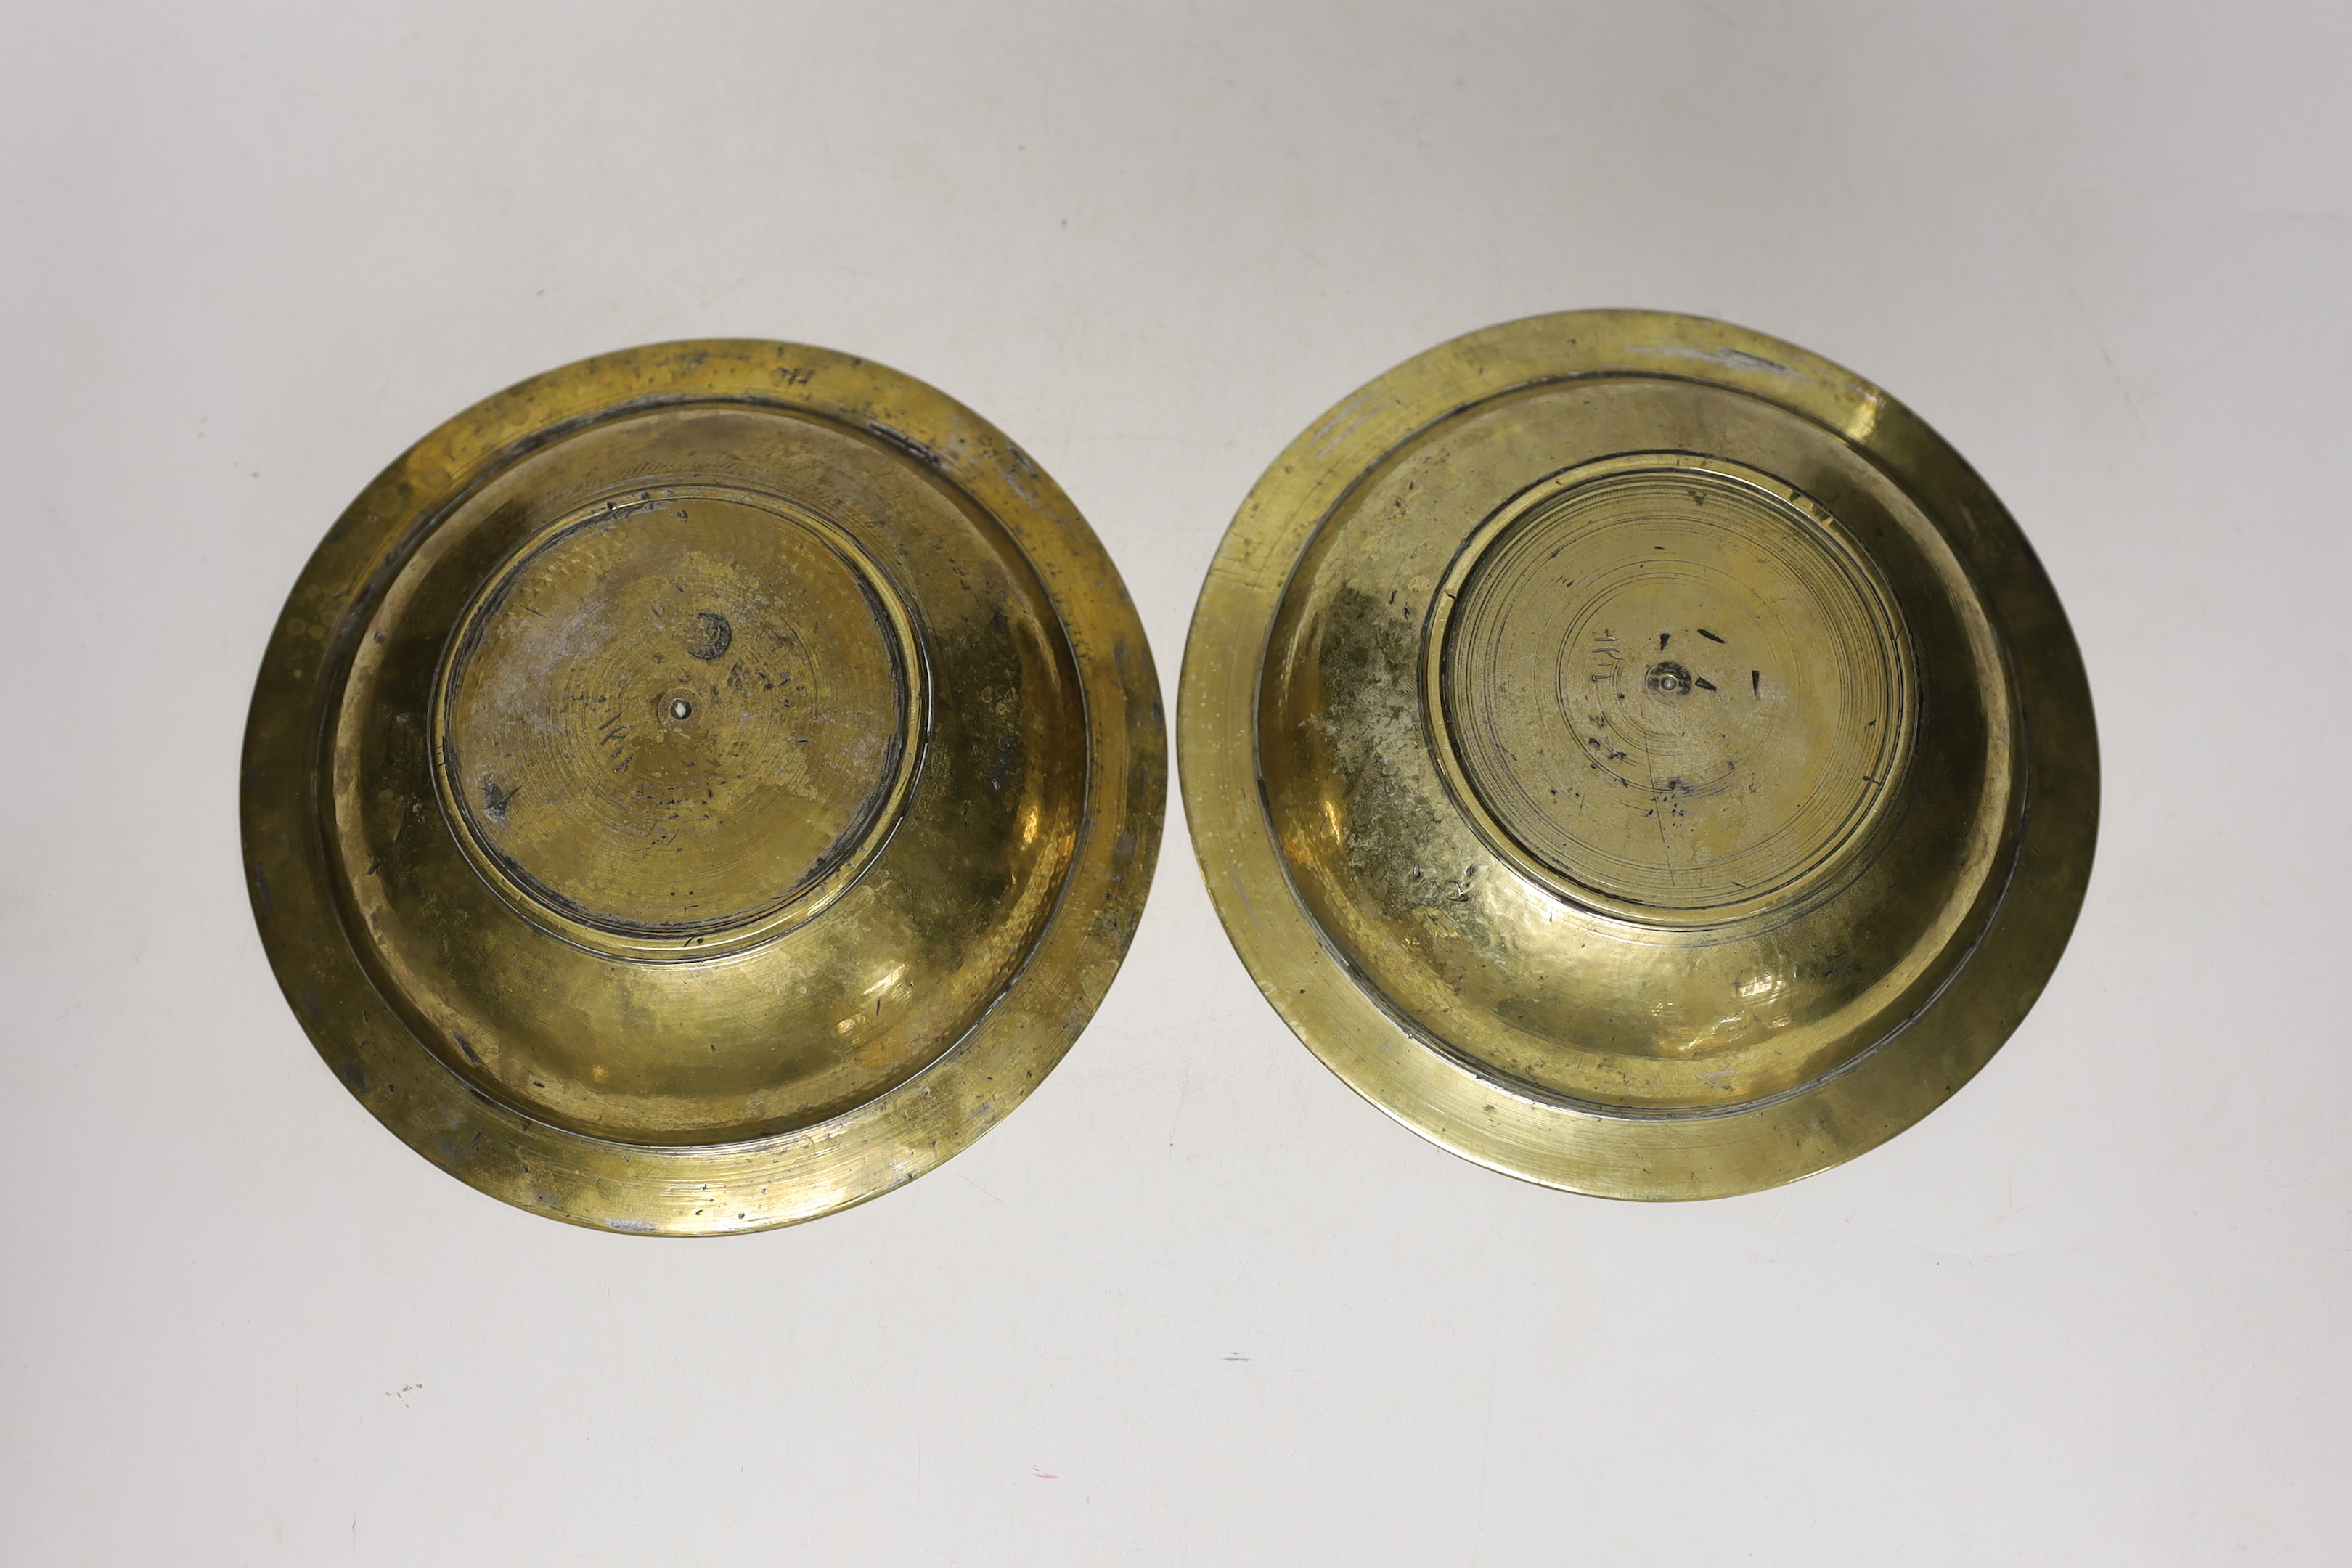 A pair and another inlaid brass dishes, Cairo ware, largest 19cm